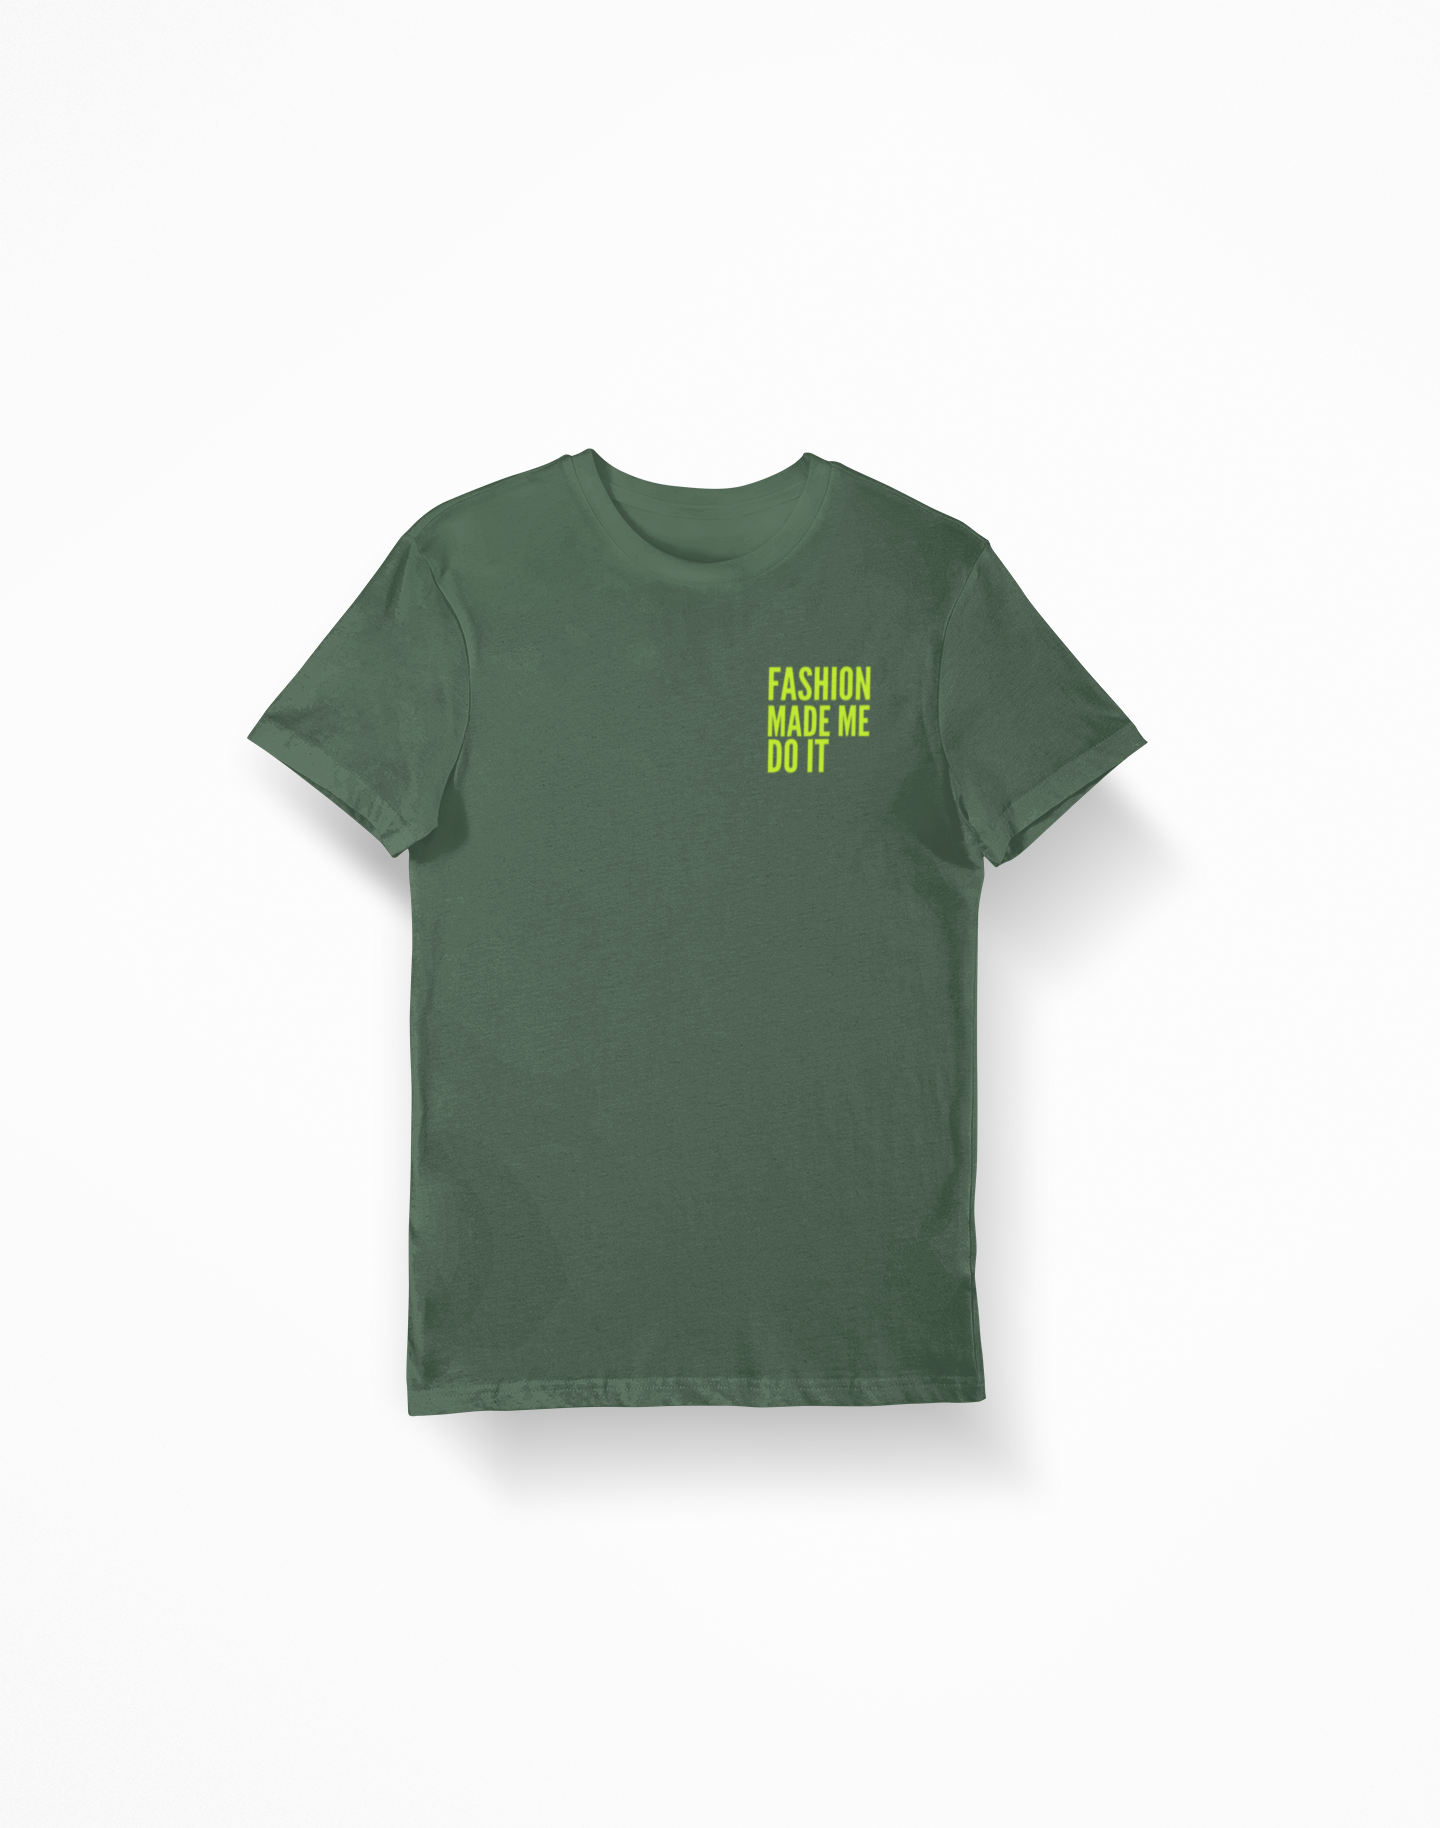 Fashion Made Me Do It Unisex Tee ARMY GREEN